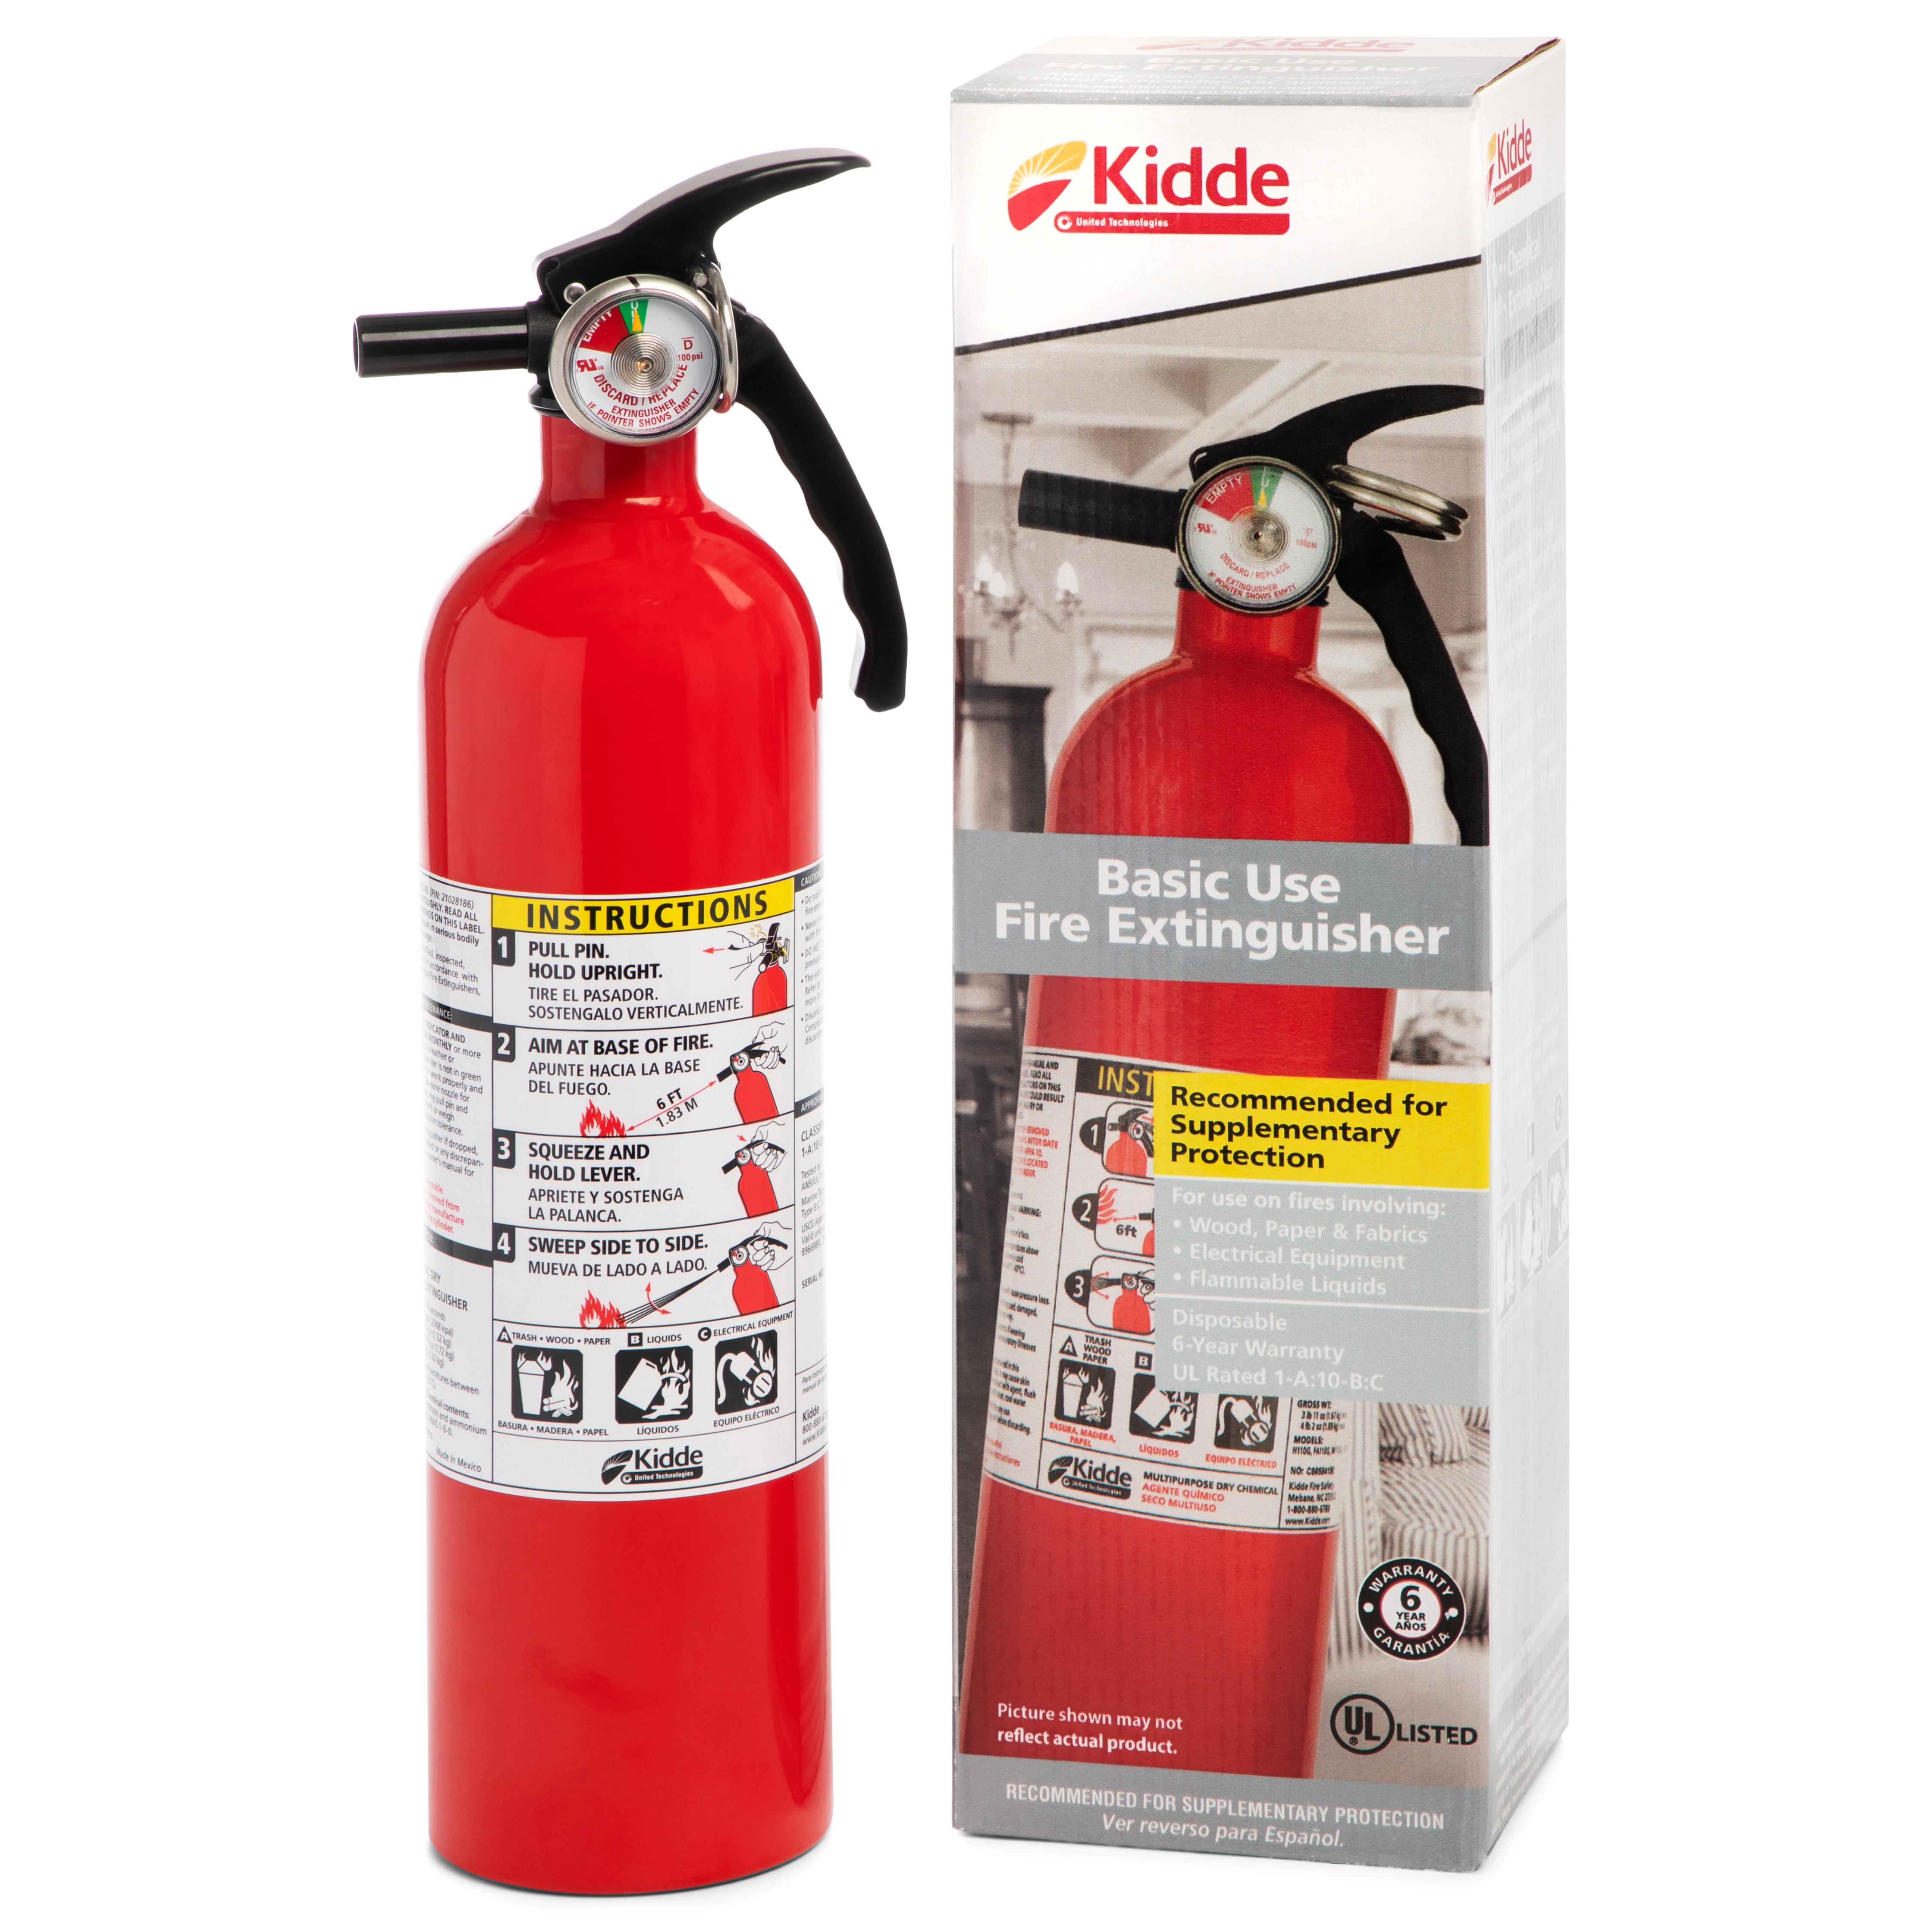 Kidde Multipurpose Home Fire Extinguisher, UL Rated 1-A:10-B:C, Model KD82-110ABC - image 1 of 8